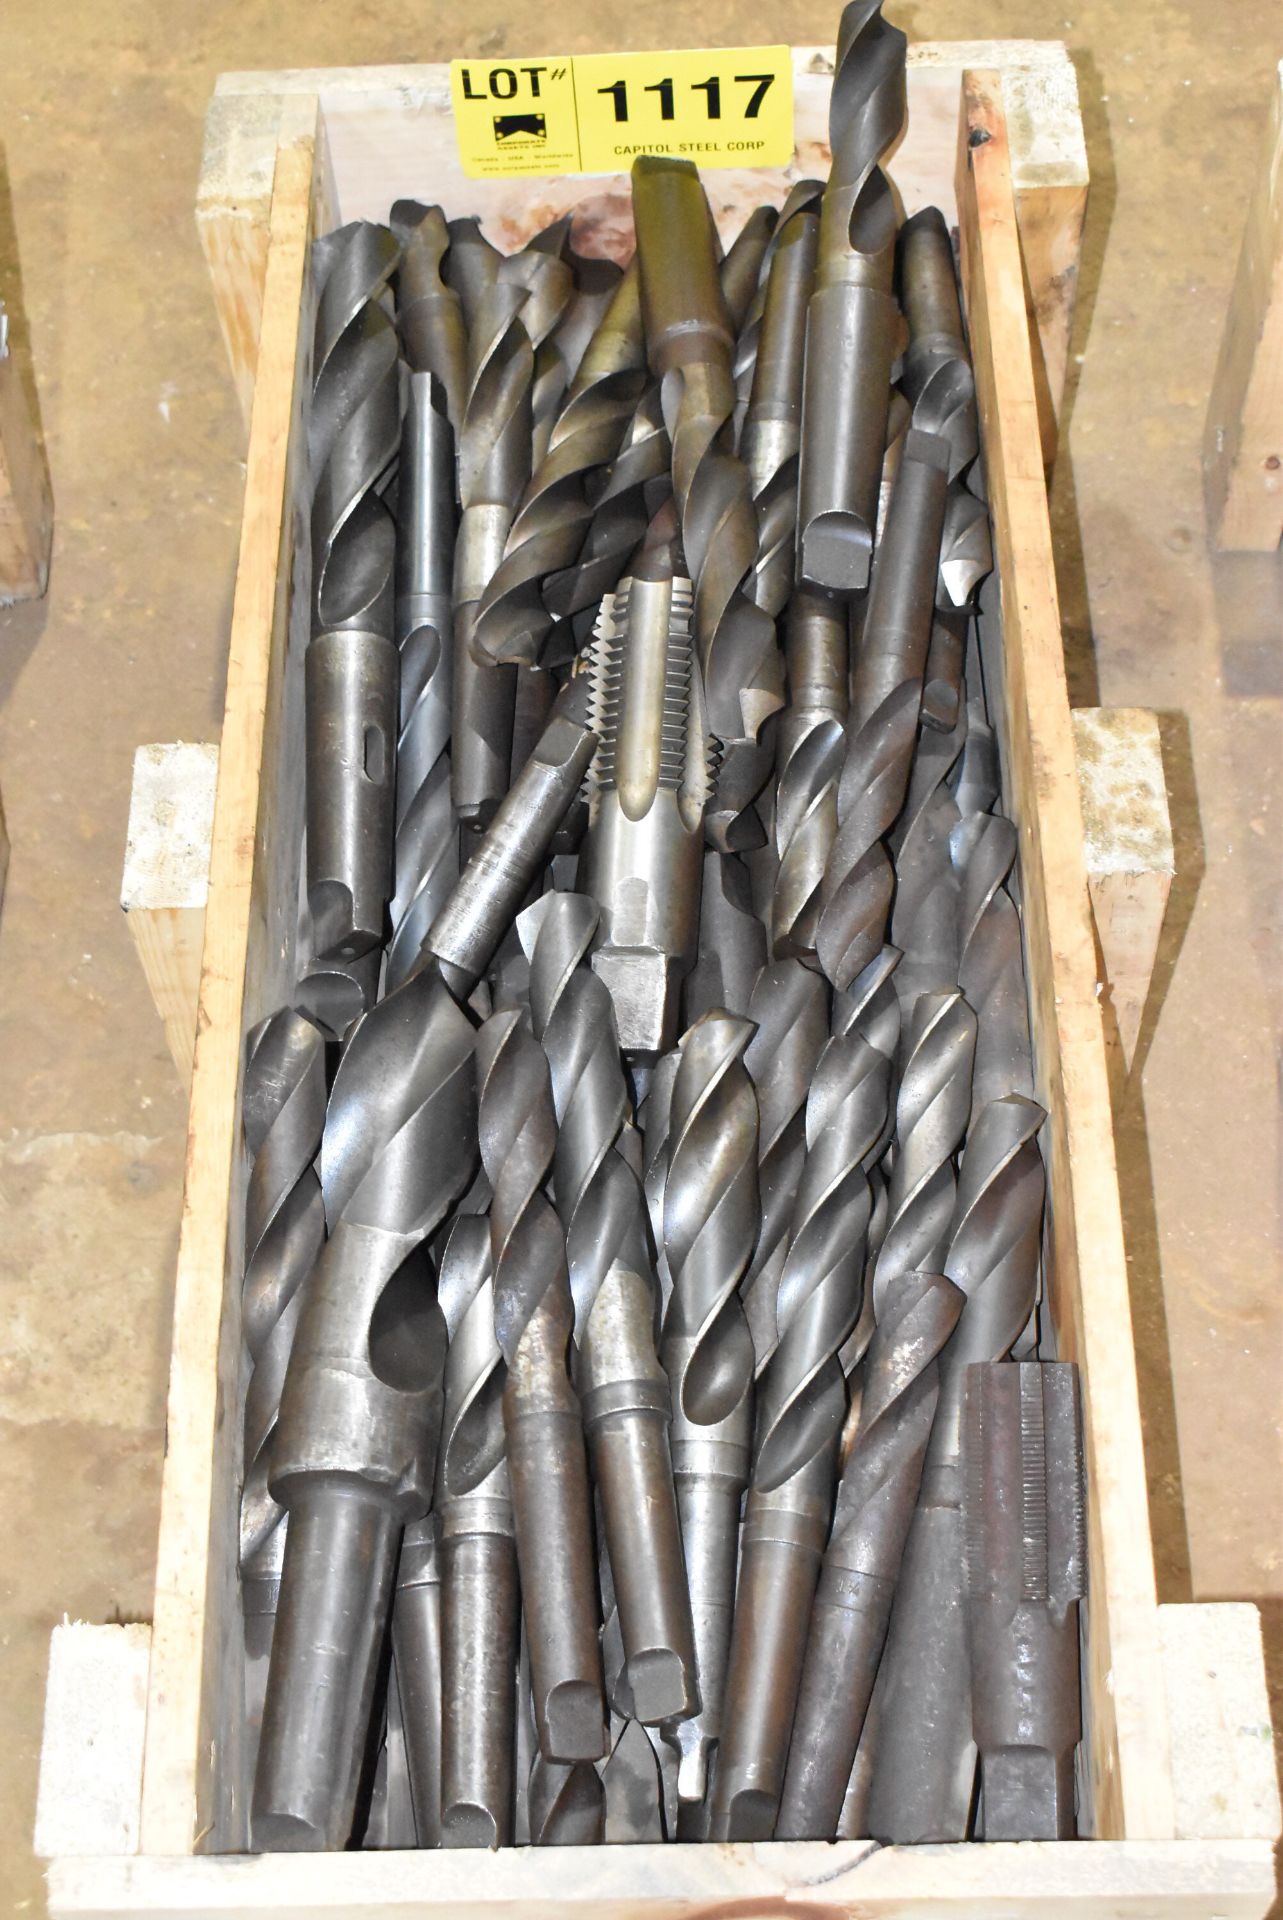 LOT/ HEAVY DUTY TAPER SHANK DRILLS [RIGGING FEES FOR LOT #1117 - $30 USD PLUS APPLICABLE TAXES]